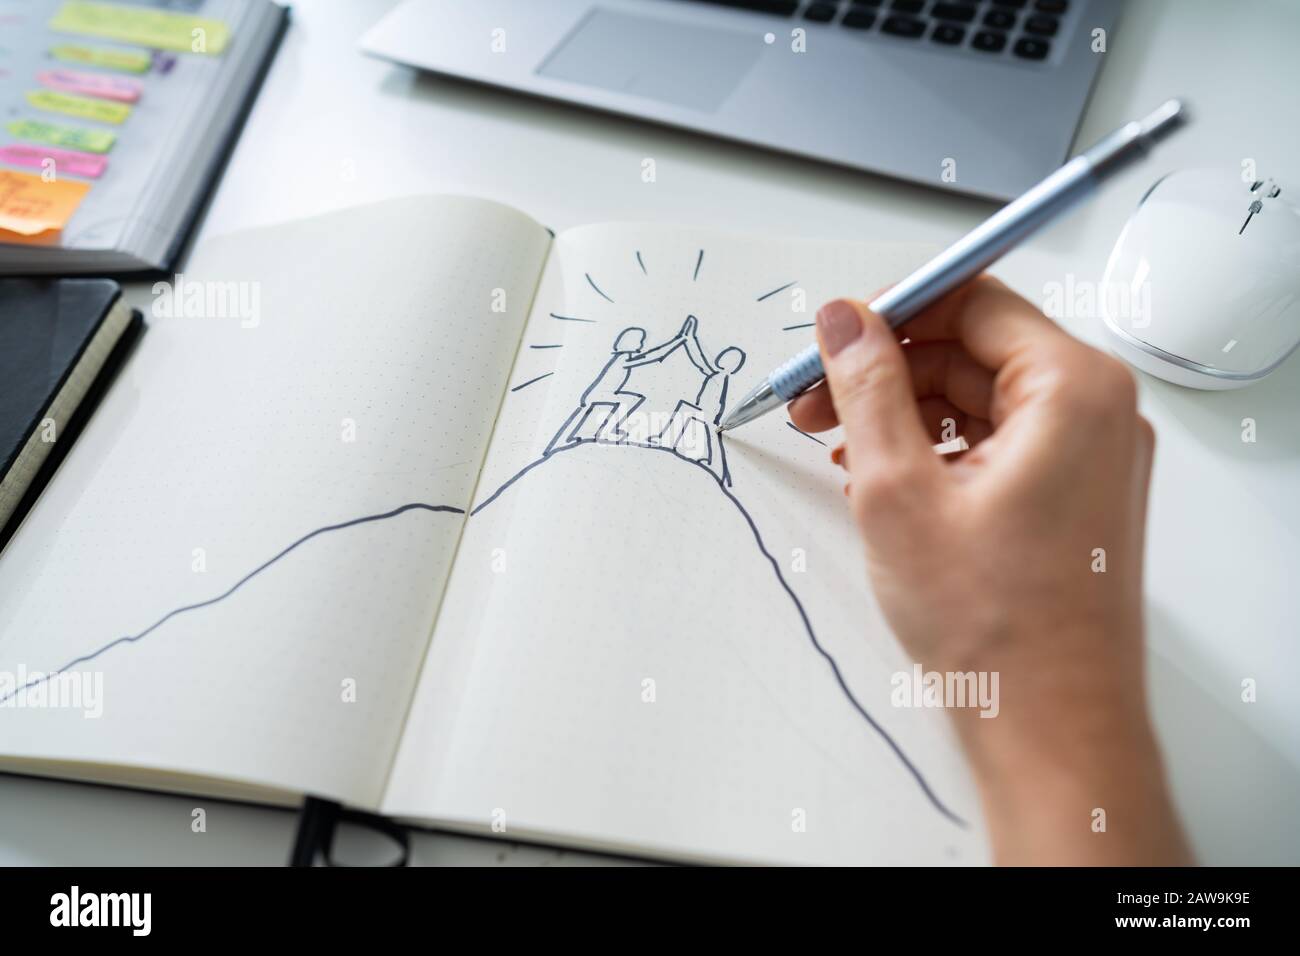 Businesswoman Drawing The Figures Giving High Five On Notebook Stock Photo